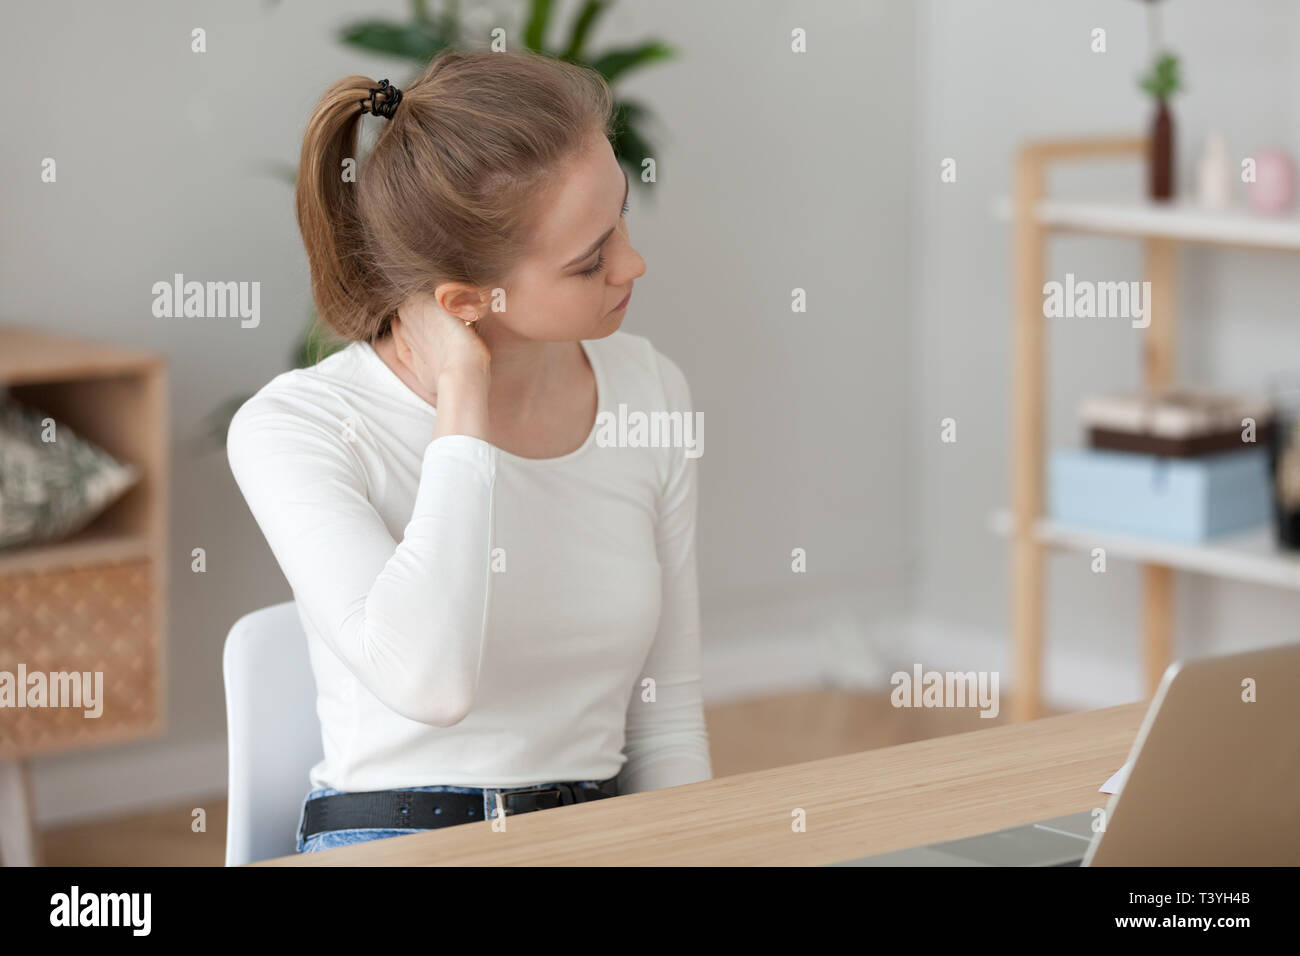 Tired woman feeling pain after sedentary computer work, massaging neck Stock Photo